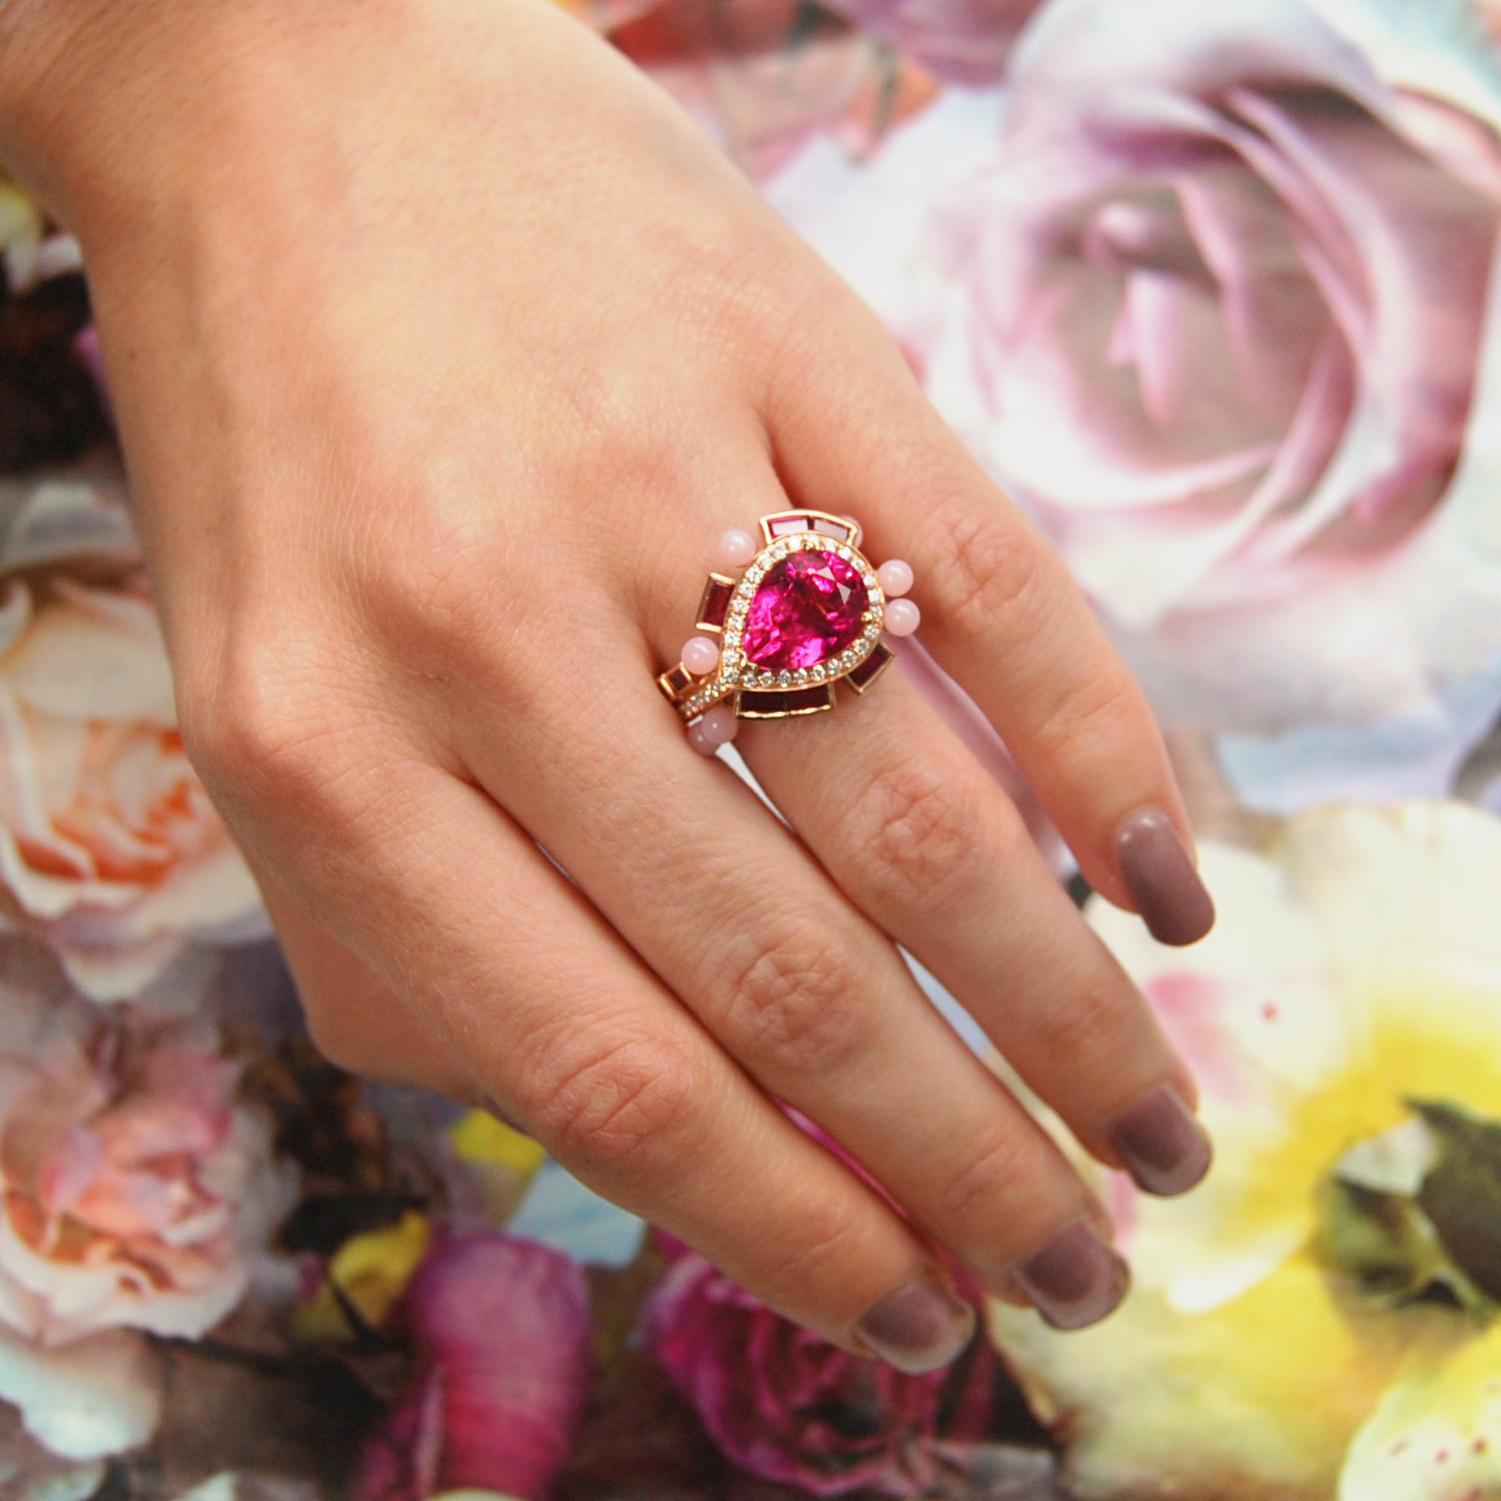 A Rubellite, Ruby, Pink Opal and Diamond Gold Ring in the Wisteria Collection by the Jewelry Designer, Sarah Ho.

A 3.92ct pear cut rubellite is surrounded by pave diamonds, ruby baguettes and opal beads.  This ring is part of the limited Wisteria